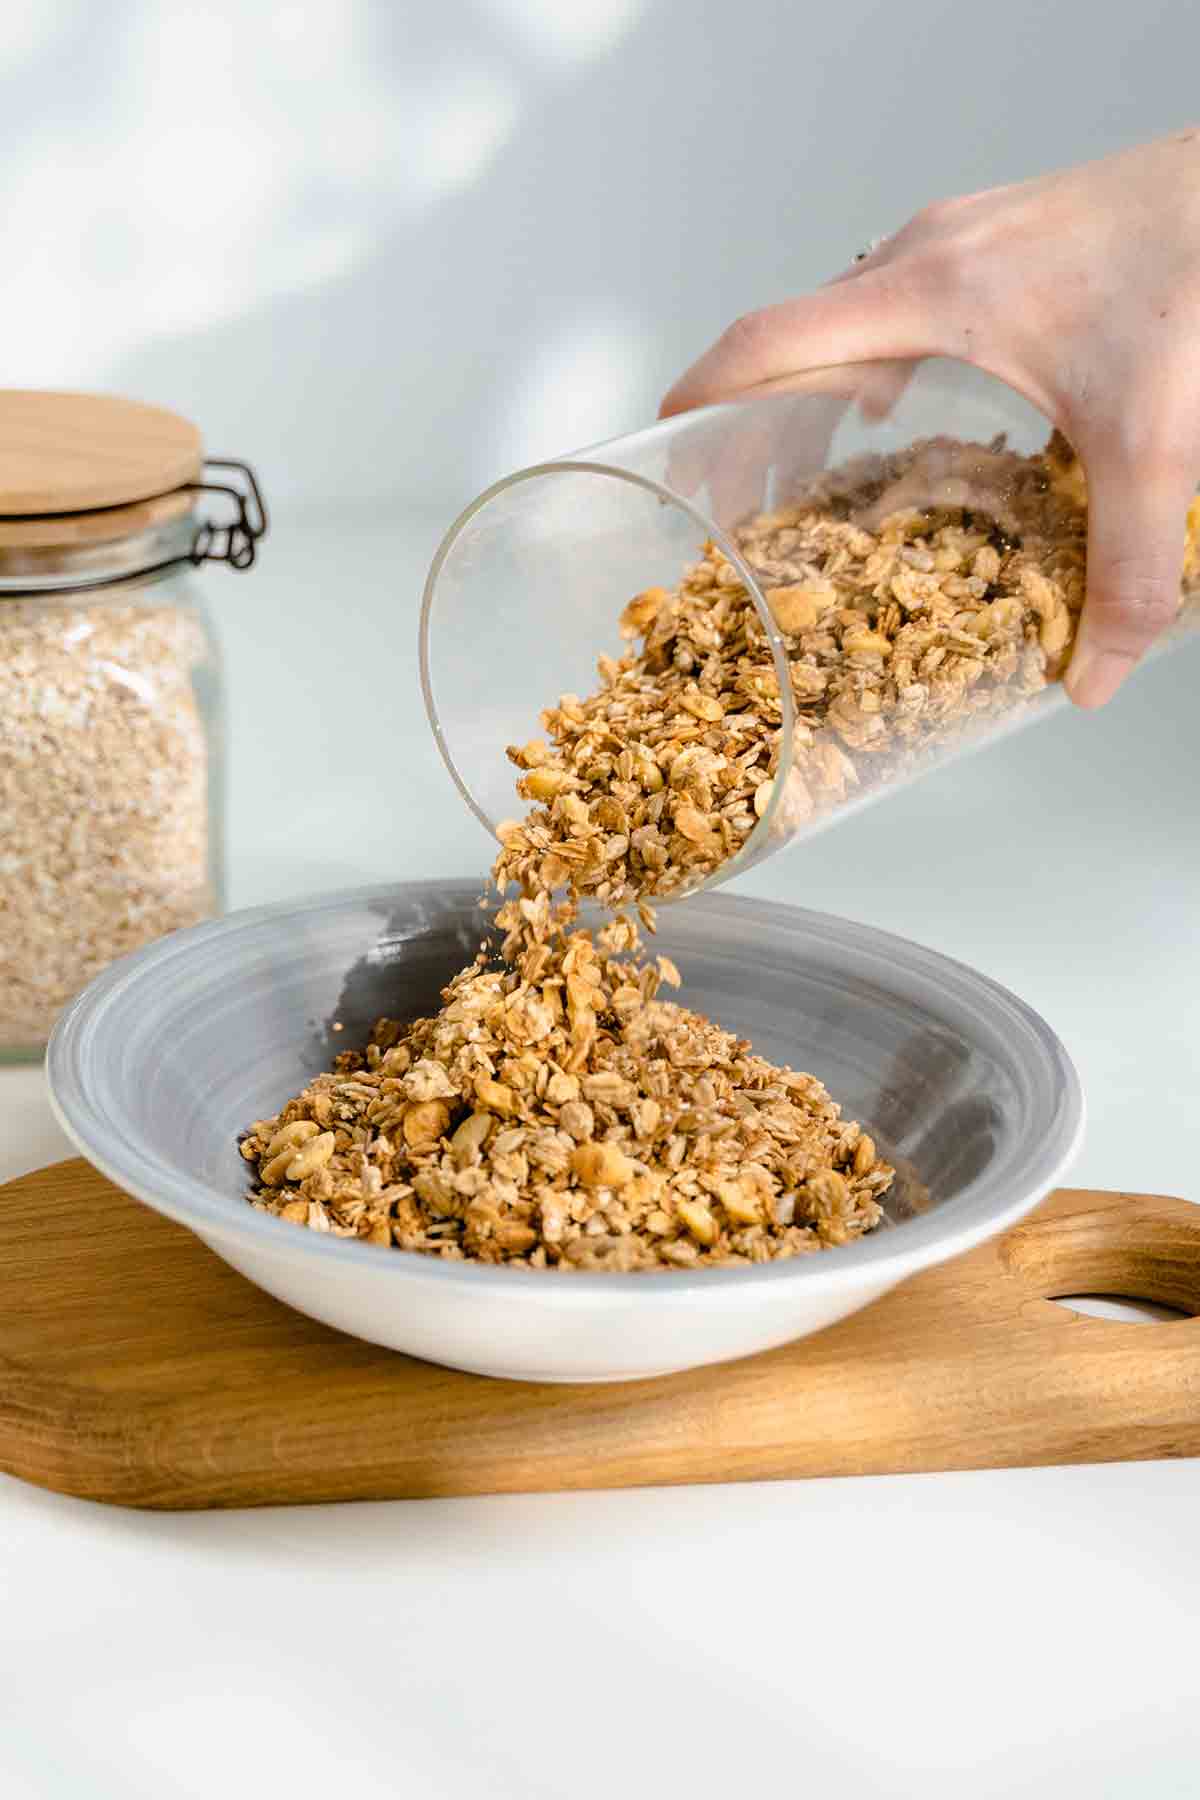 Pouring Cereal Into A Bowl